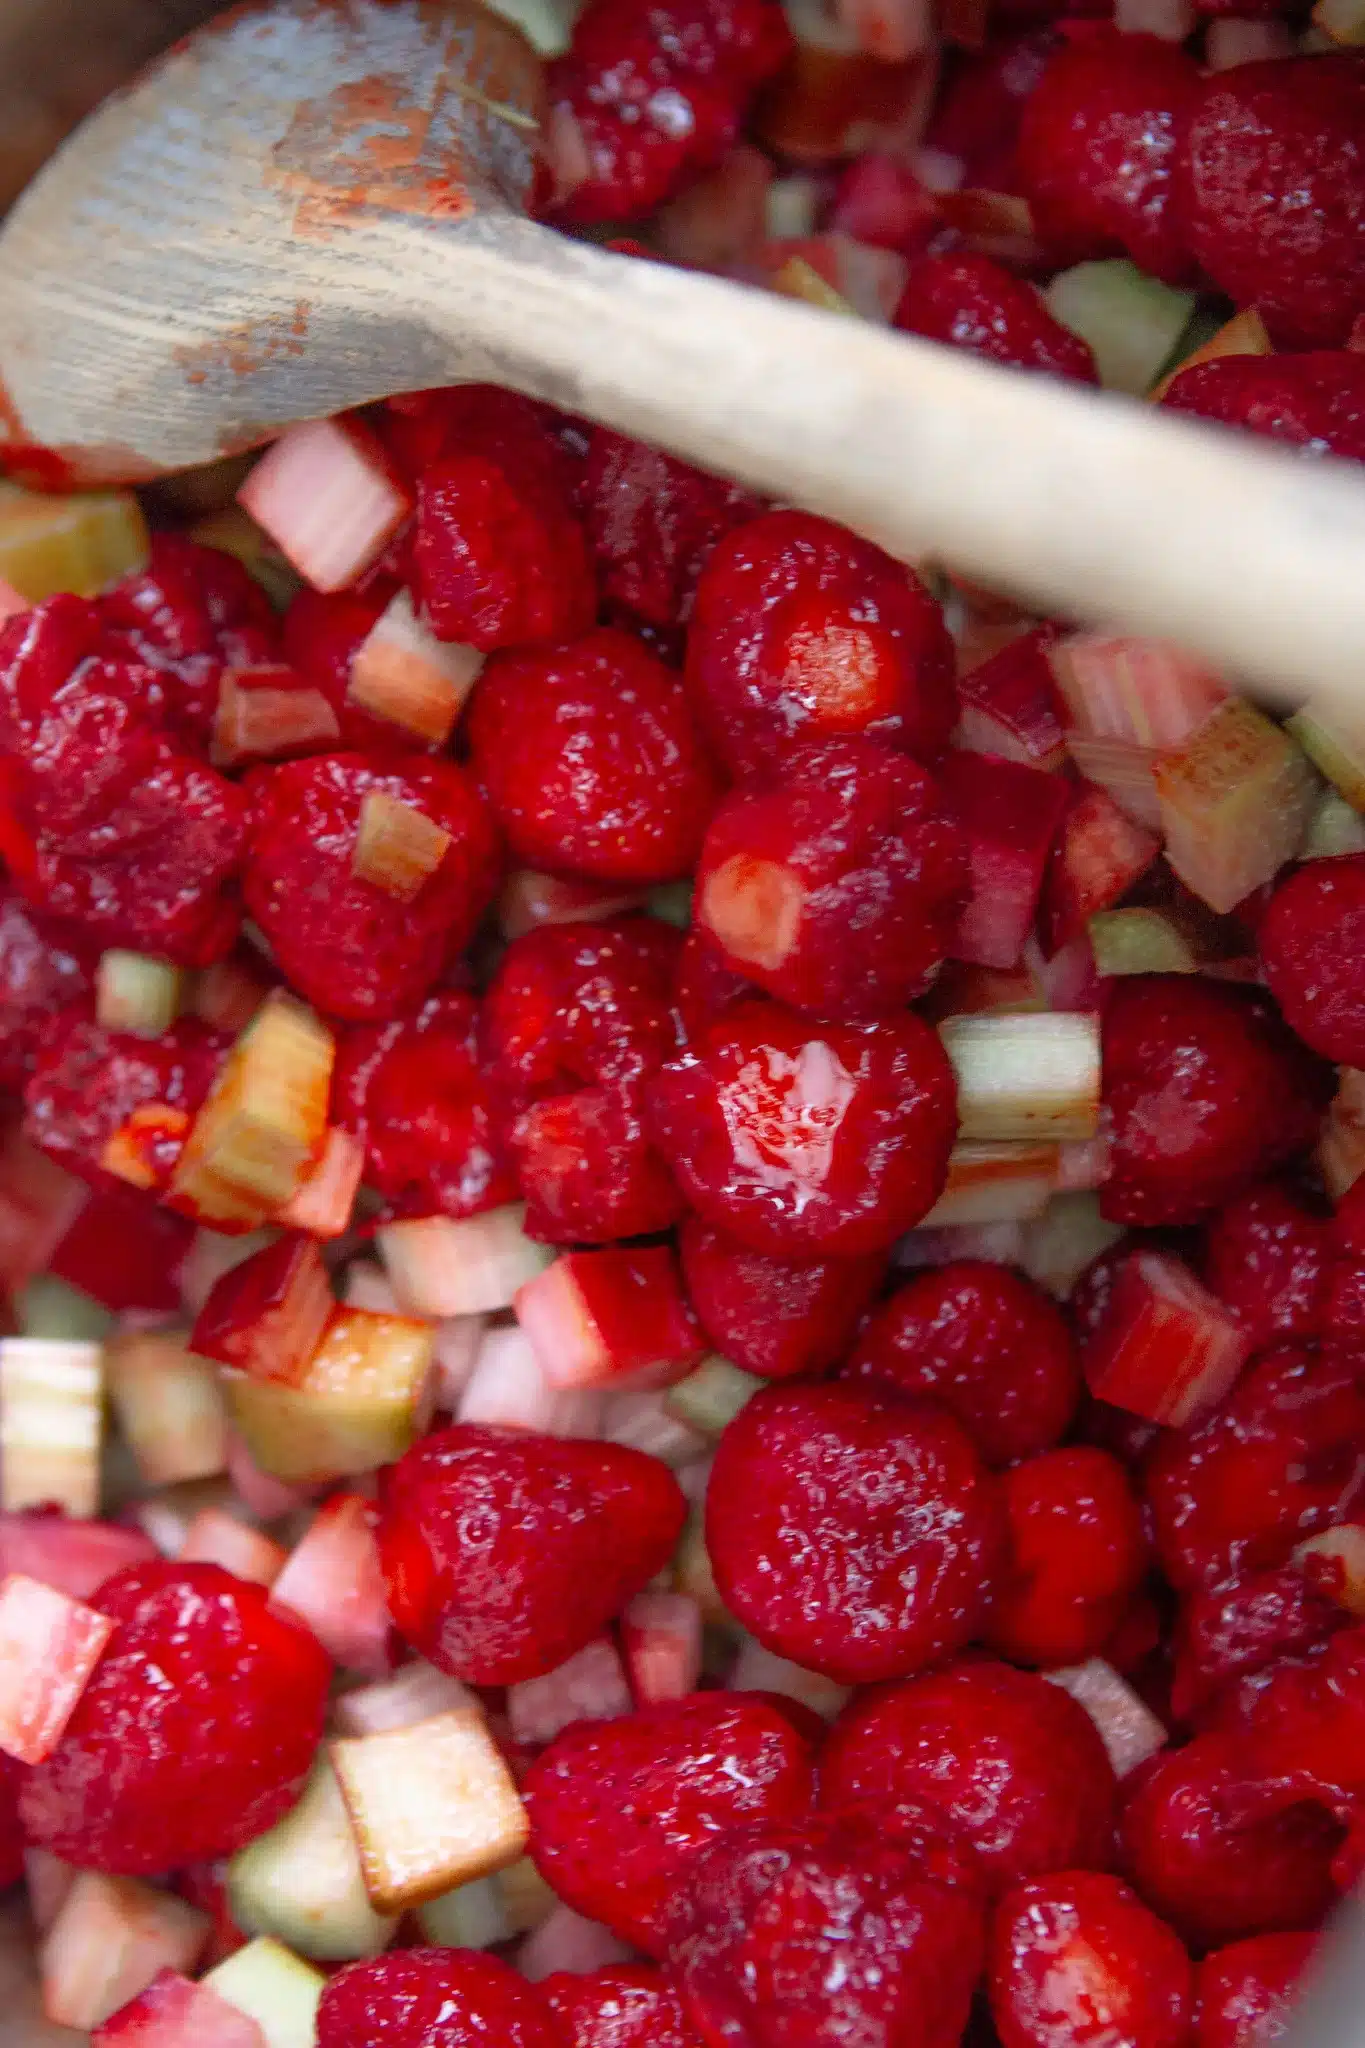 up close of strawberries and chopped rhubarb